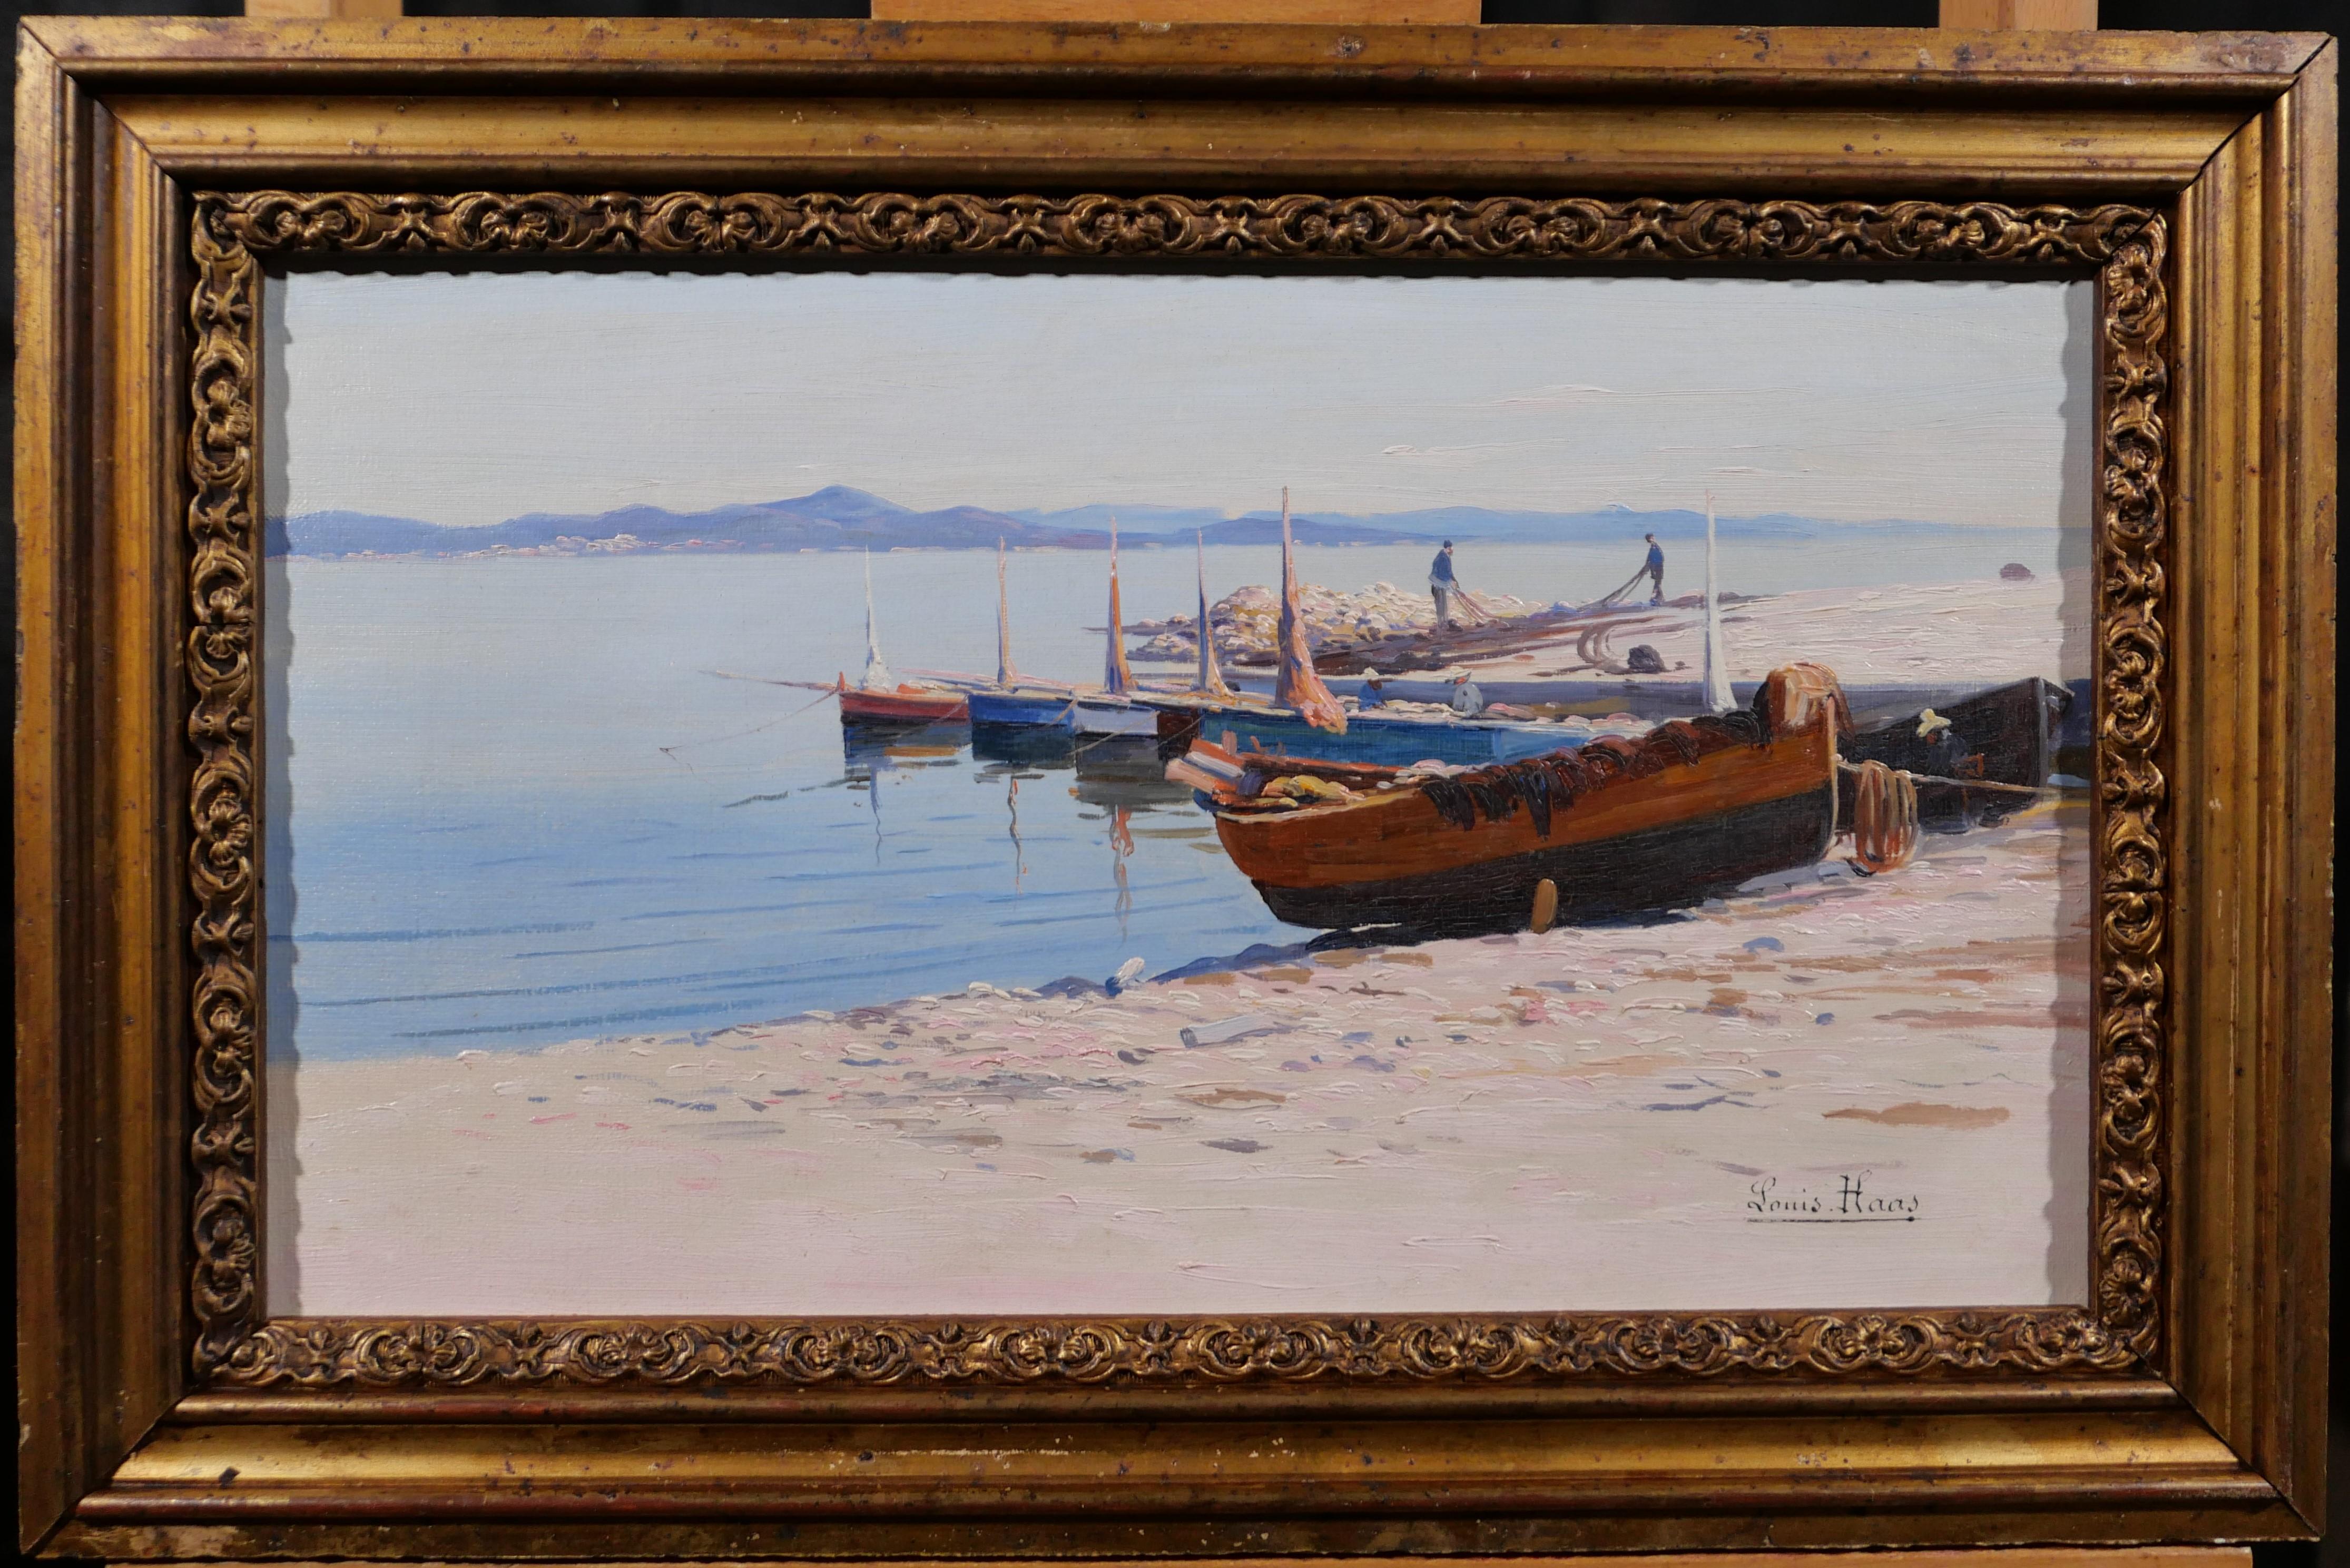 Saint-Tropez, boat on the point (France) - Painting by Louis HAAS